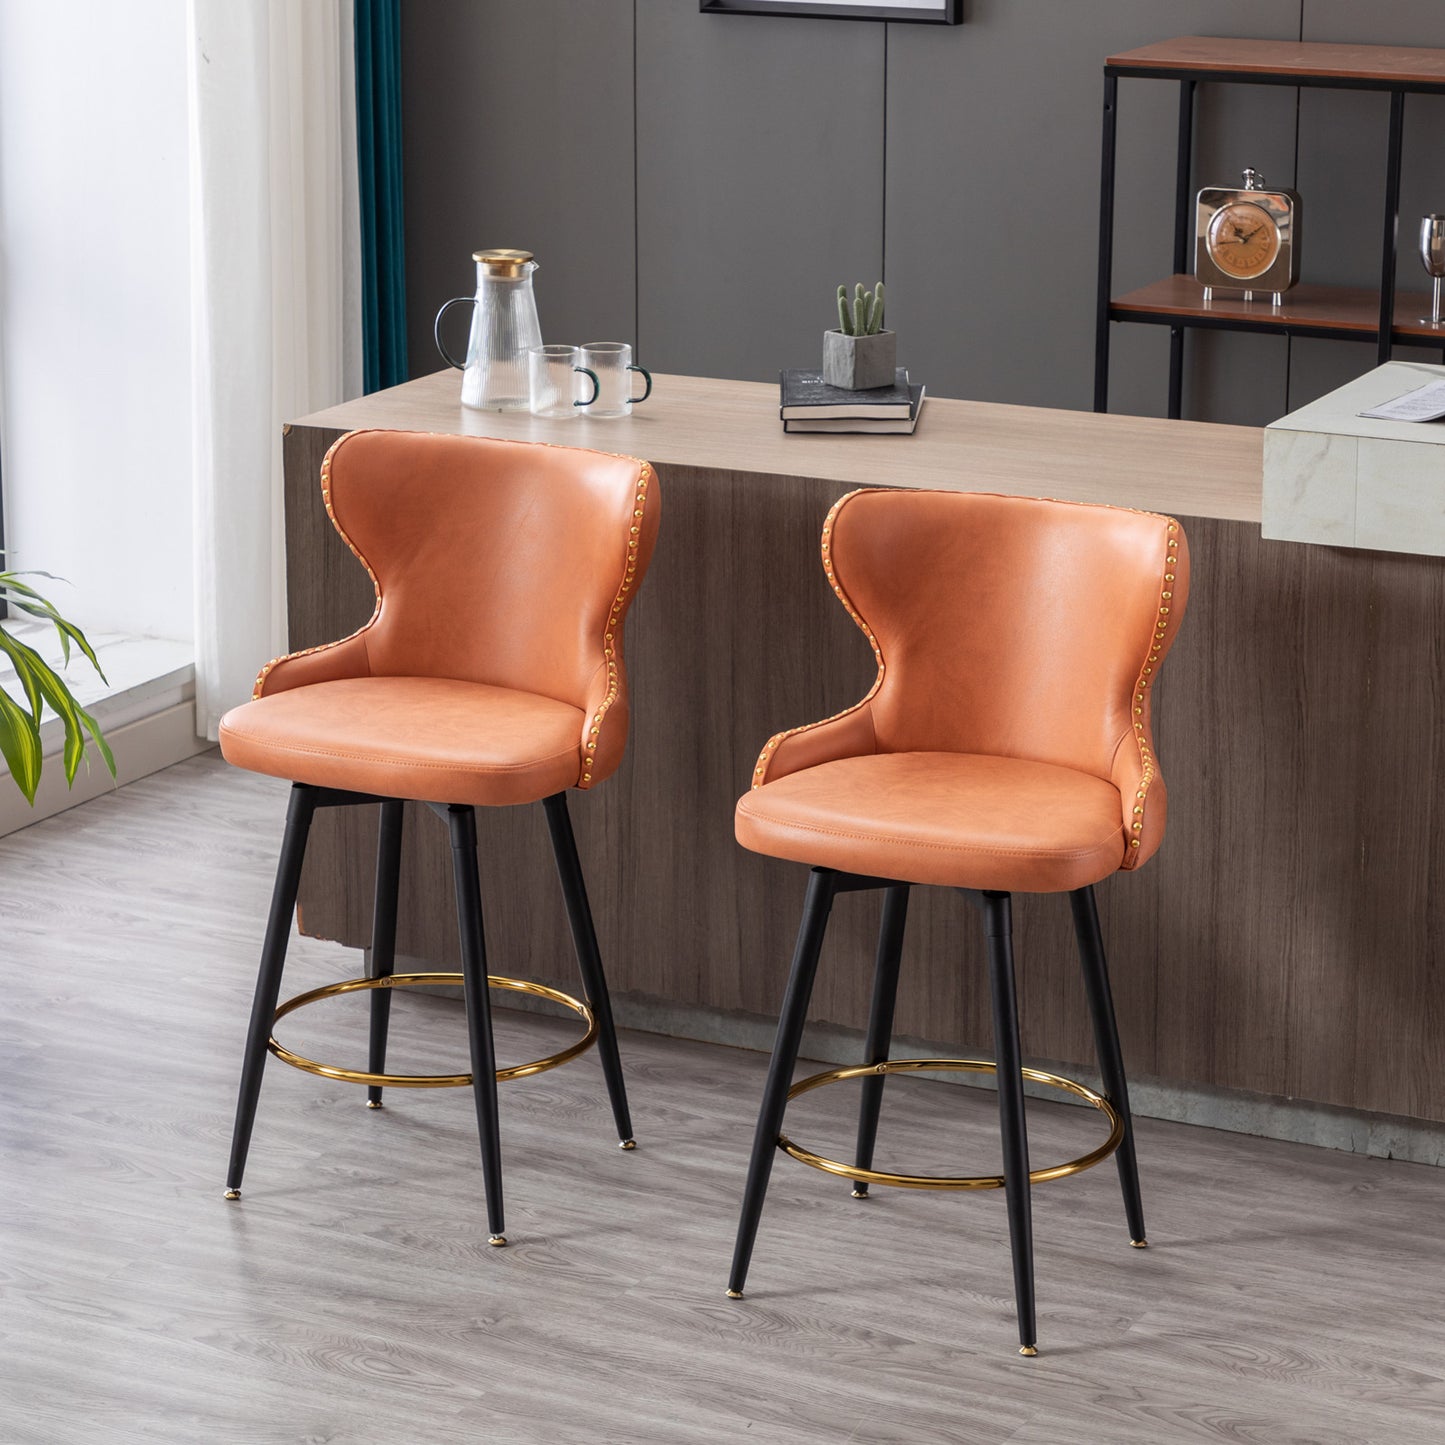 A&A Furniture Counter Height 25" Modern Leathaire Fabric Bar Chairs with Metal Legs Set of 2 - Orange